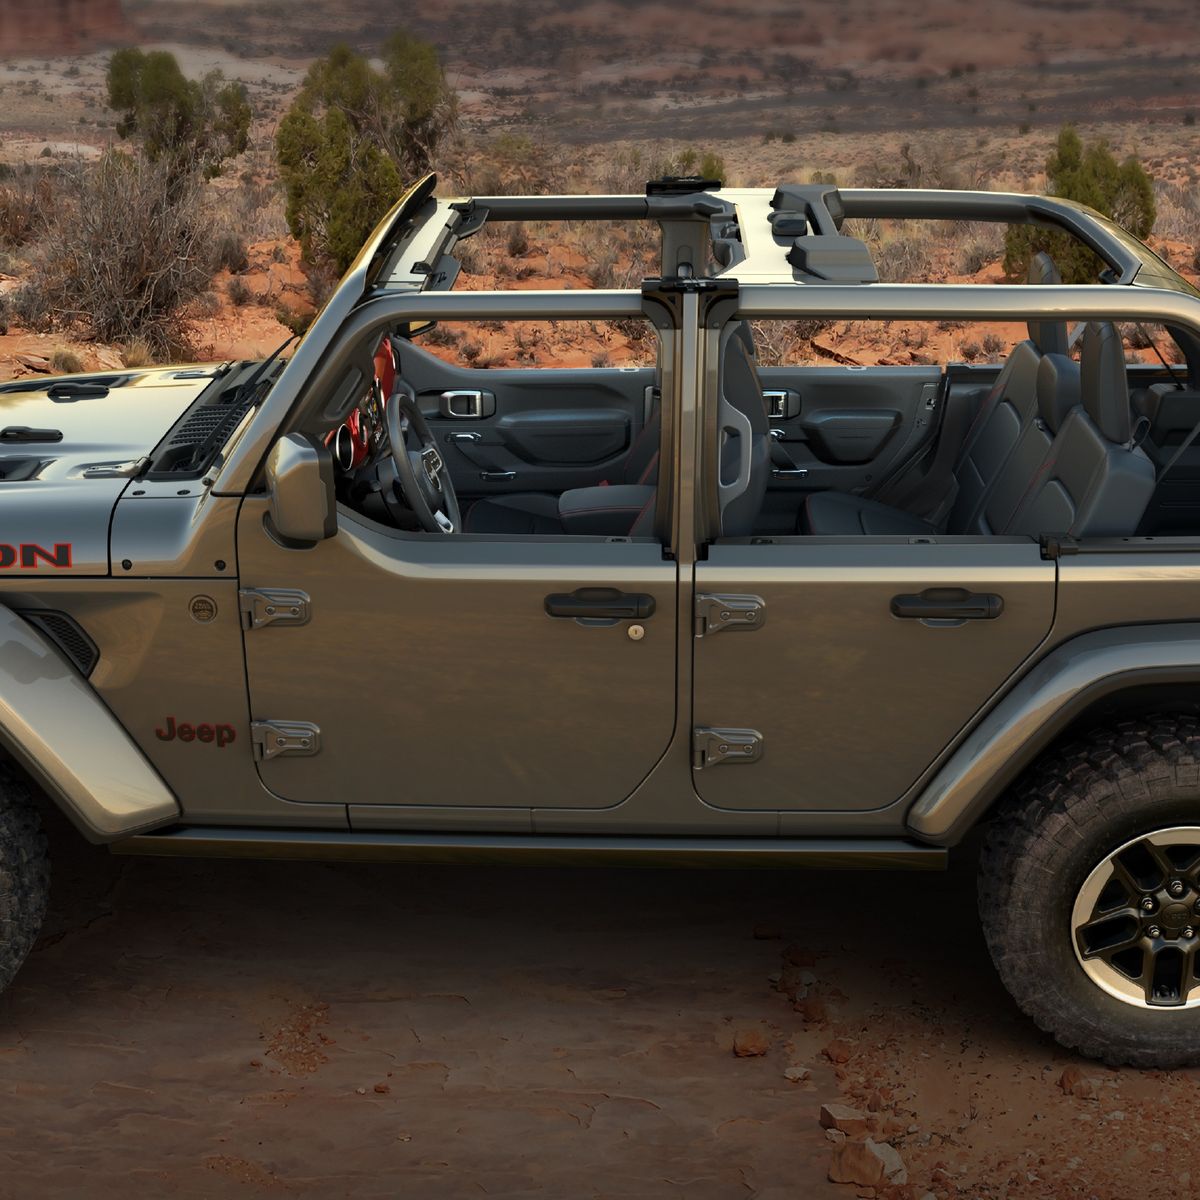 Jeep Wrangler Half Door Factory Option Now Officially Available